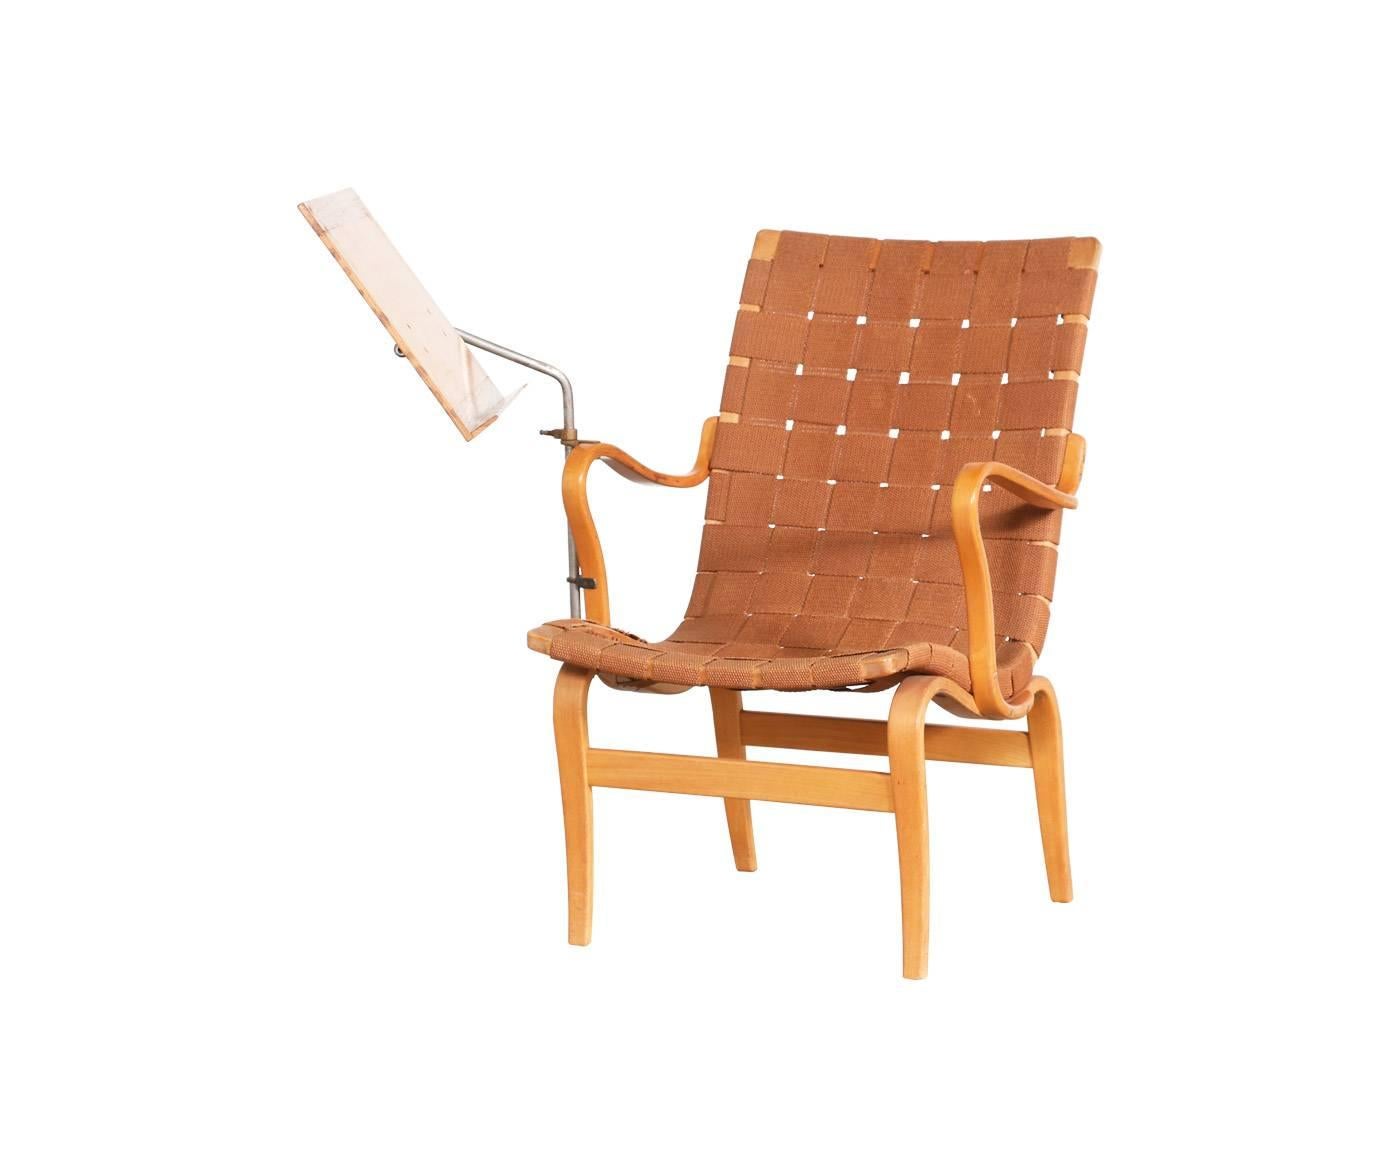 Designer: Adrian Pearsall.
Manufacturer: Craft Associates.
Period/style: Mid-Century Modern.
Country: United States.
Date: 1960s.

Dimensions: 27.5″ H x 99″ L x 33″ D.
Seat height 17″.
Materials: Walnut, cotton tweed fabric.
Condition: